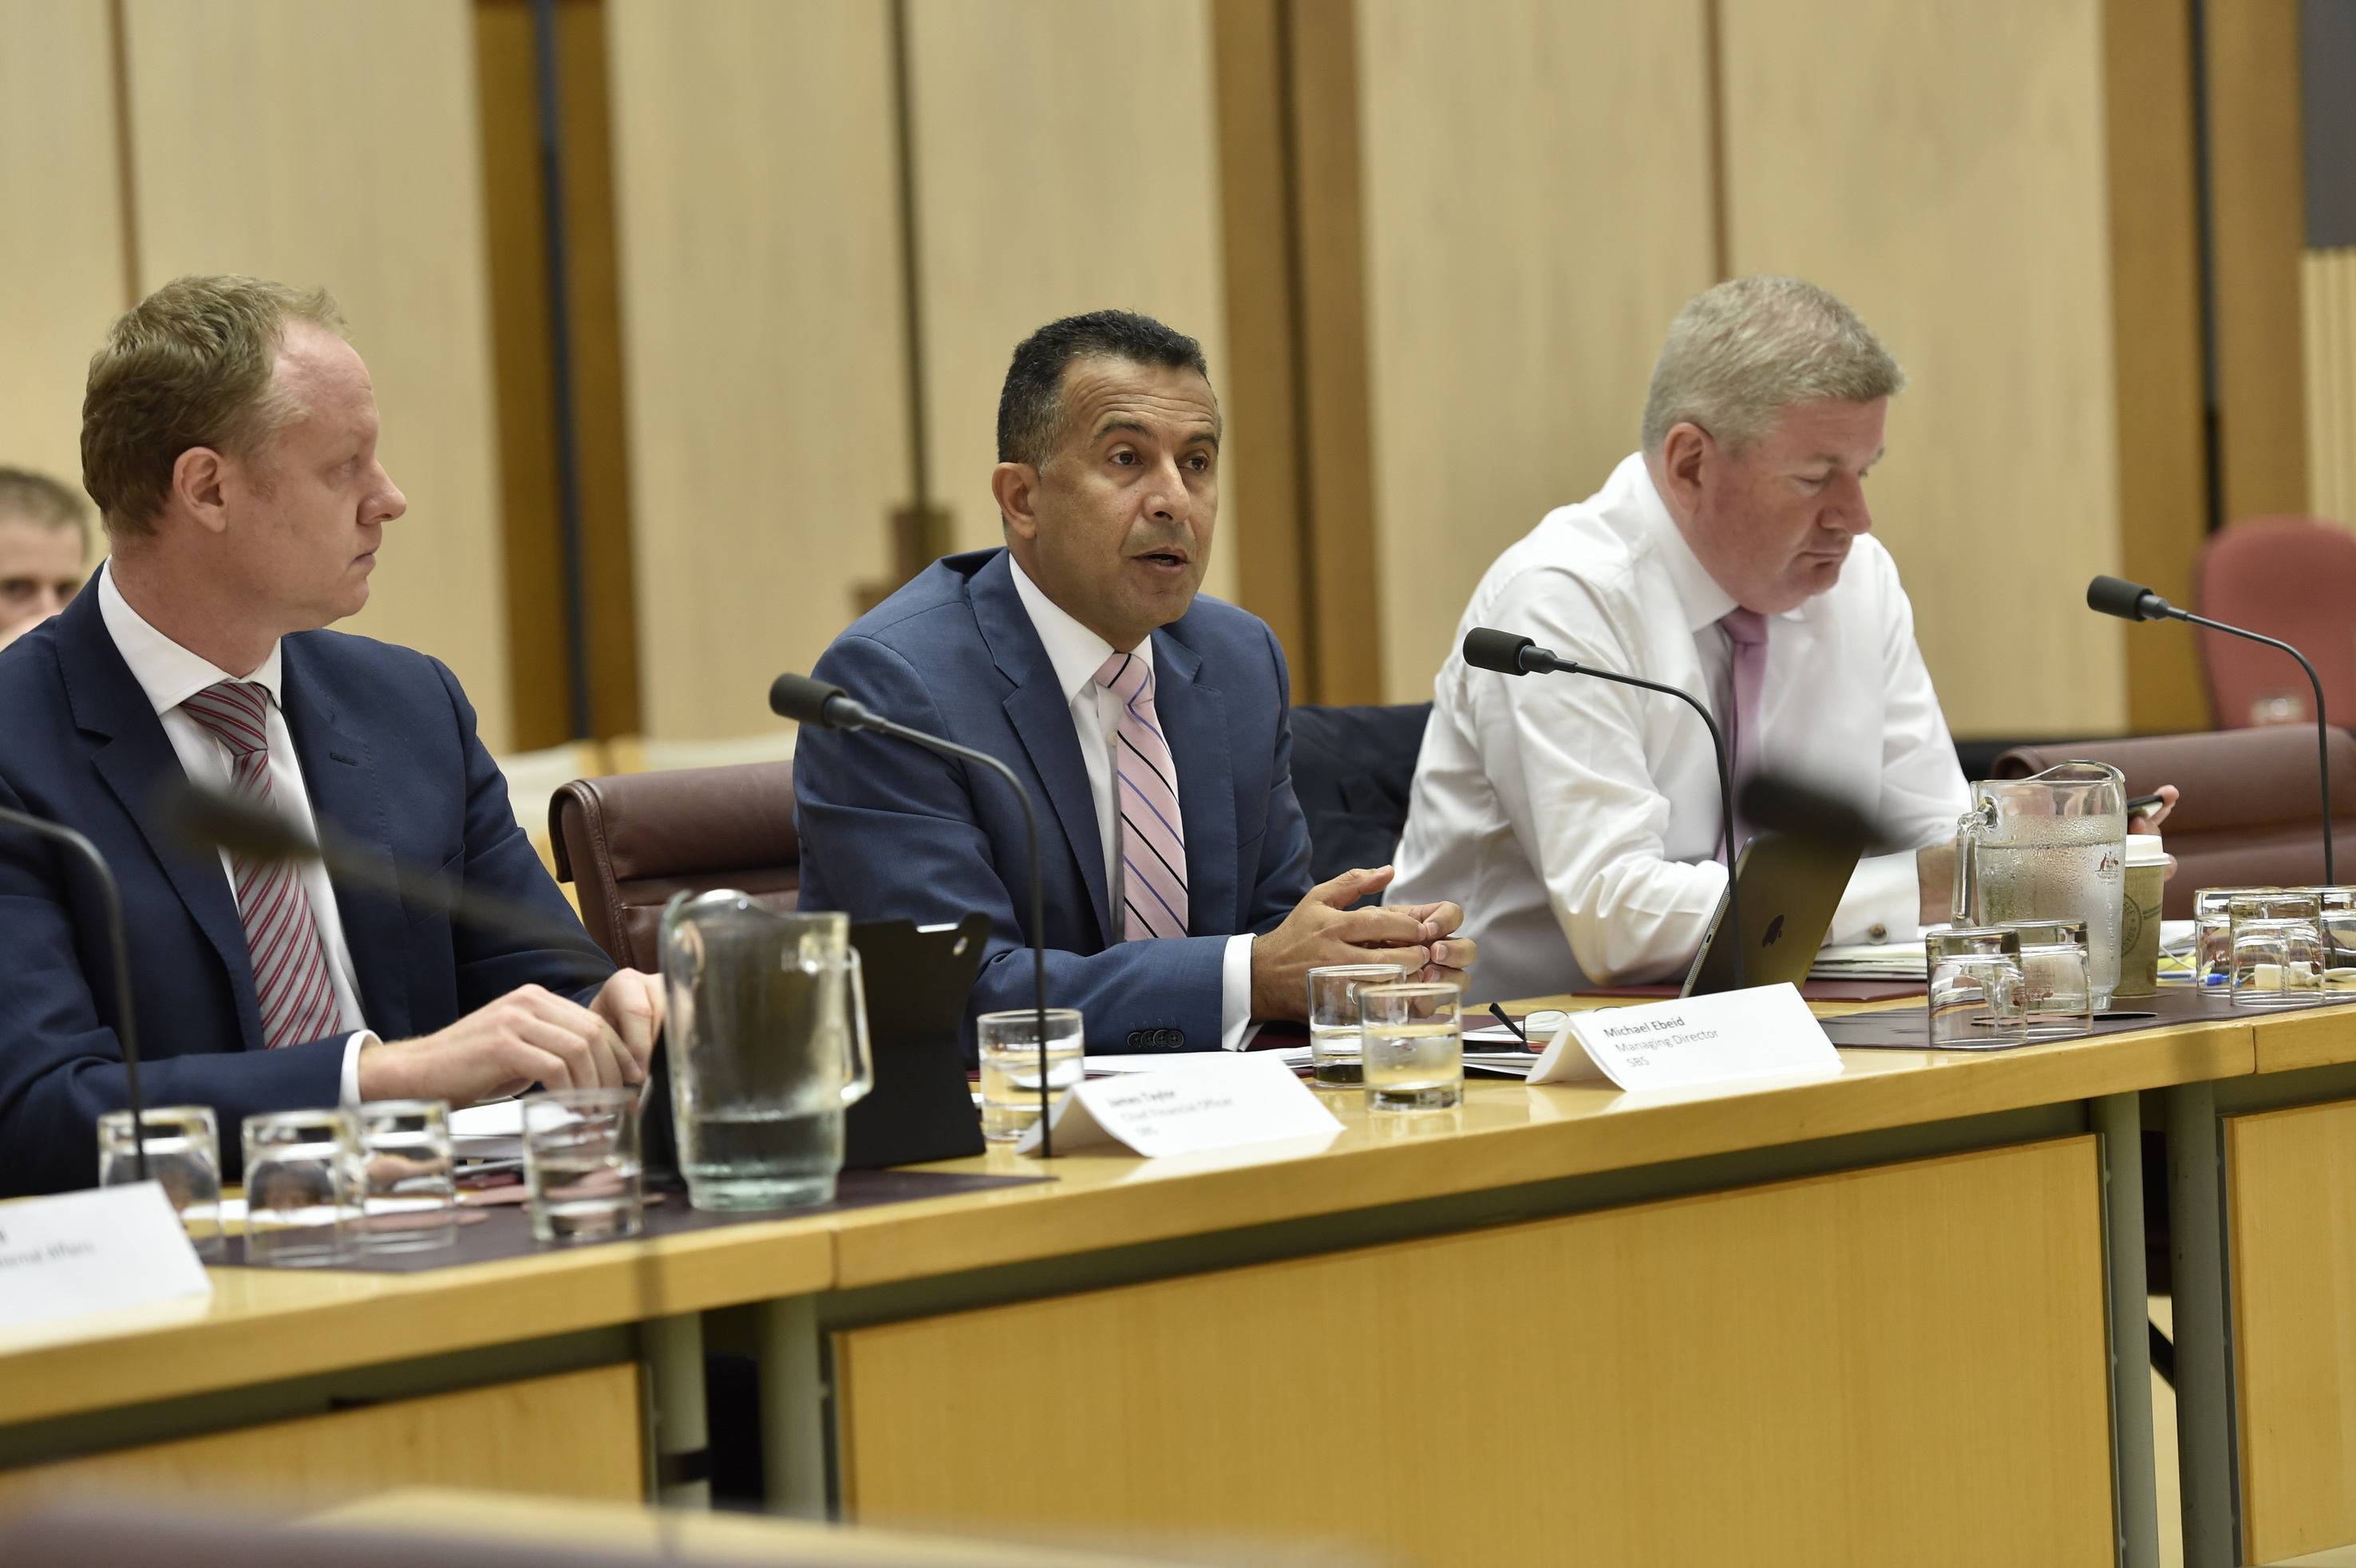 Officers from the Special Broadcasting Service (SBS) and Senator the Hon Mitch Fifield (right) appearing before the Environment and Communications Legislation Committee, 9 February 2016. DPS Auspic.